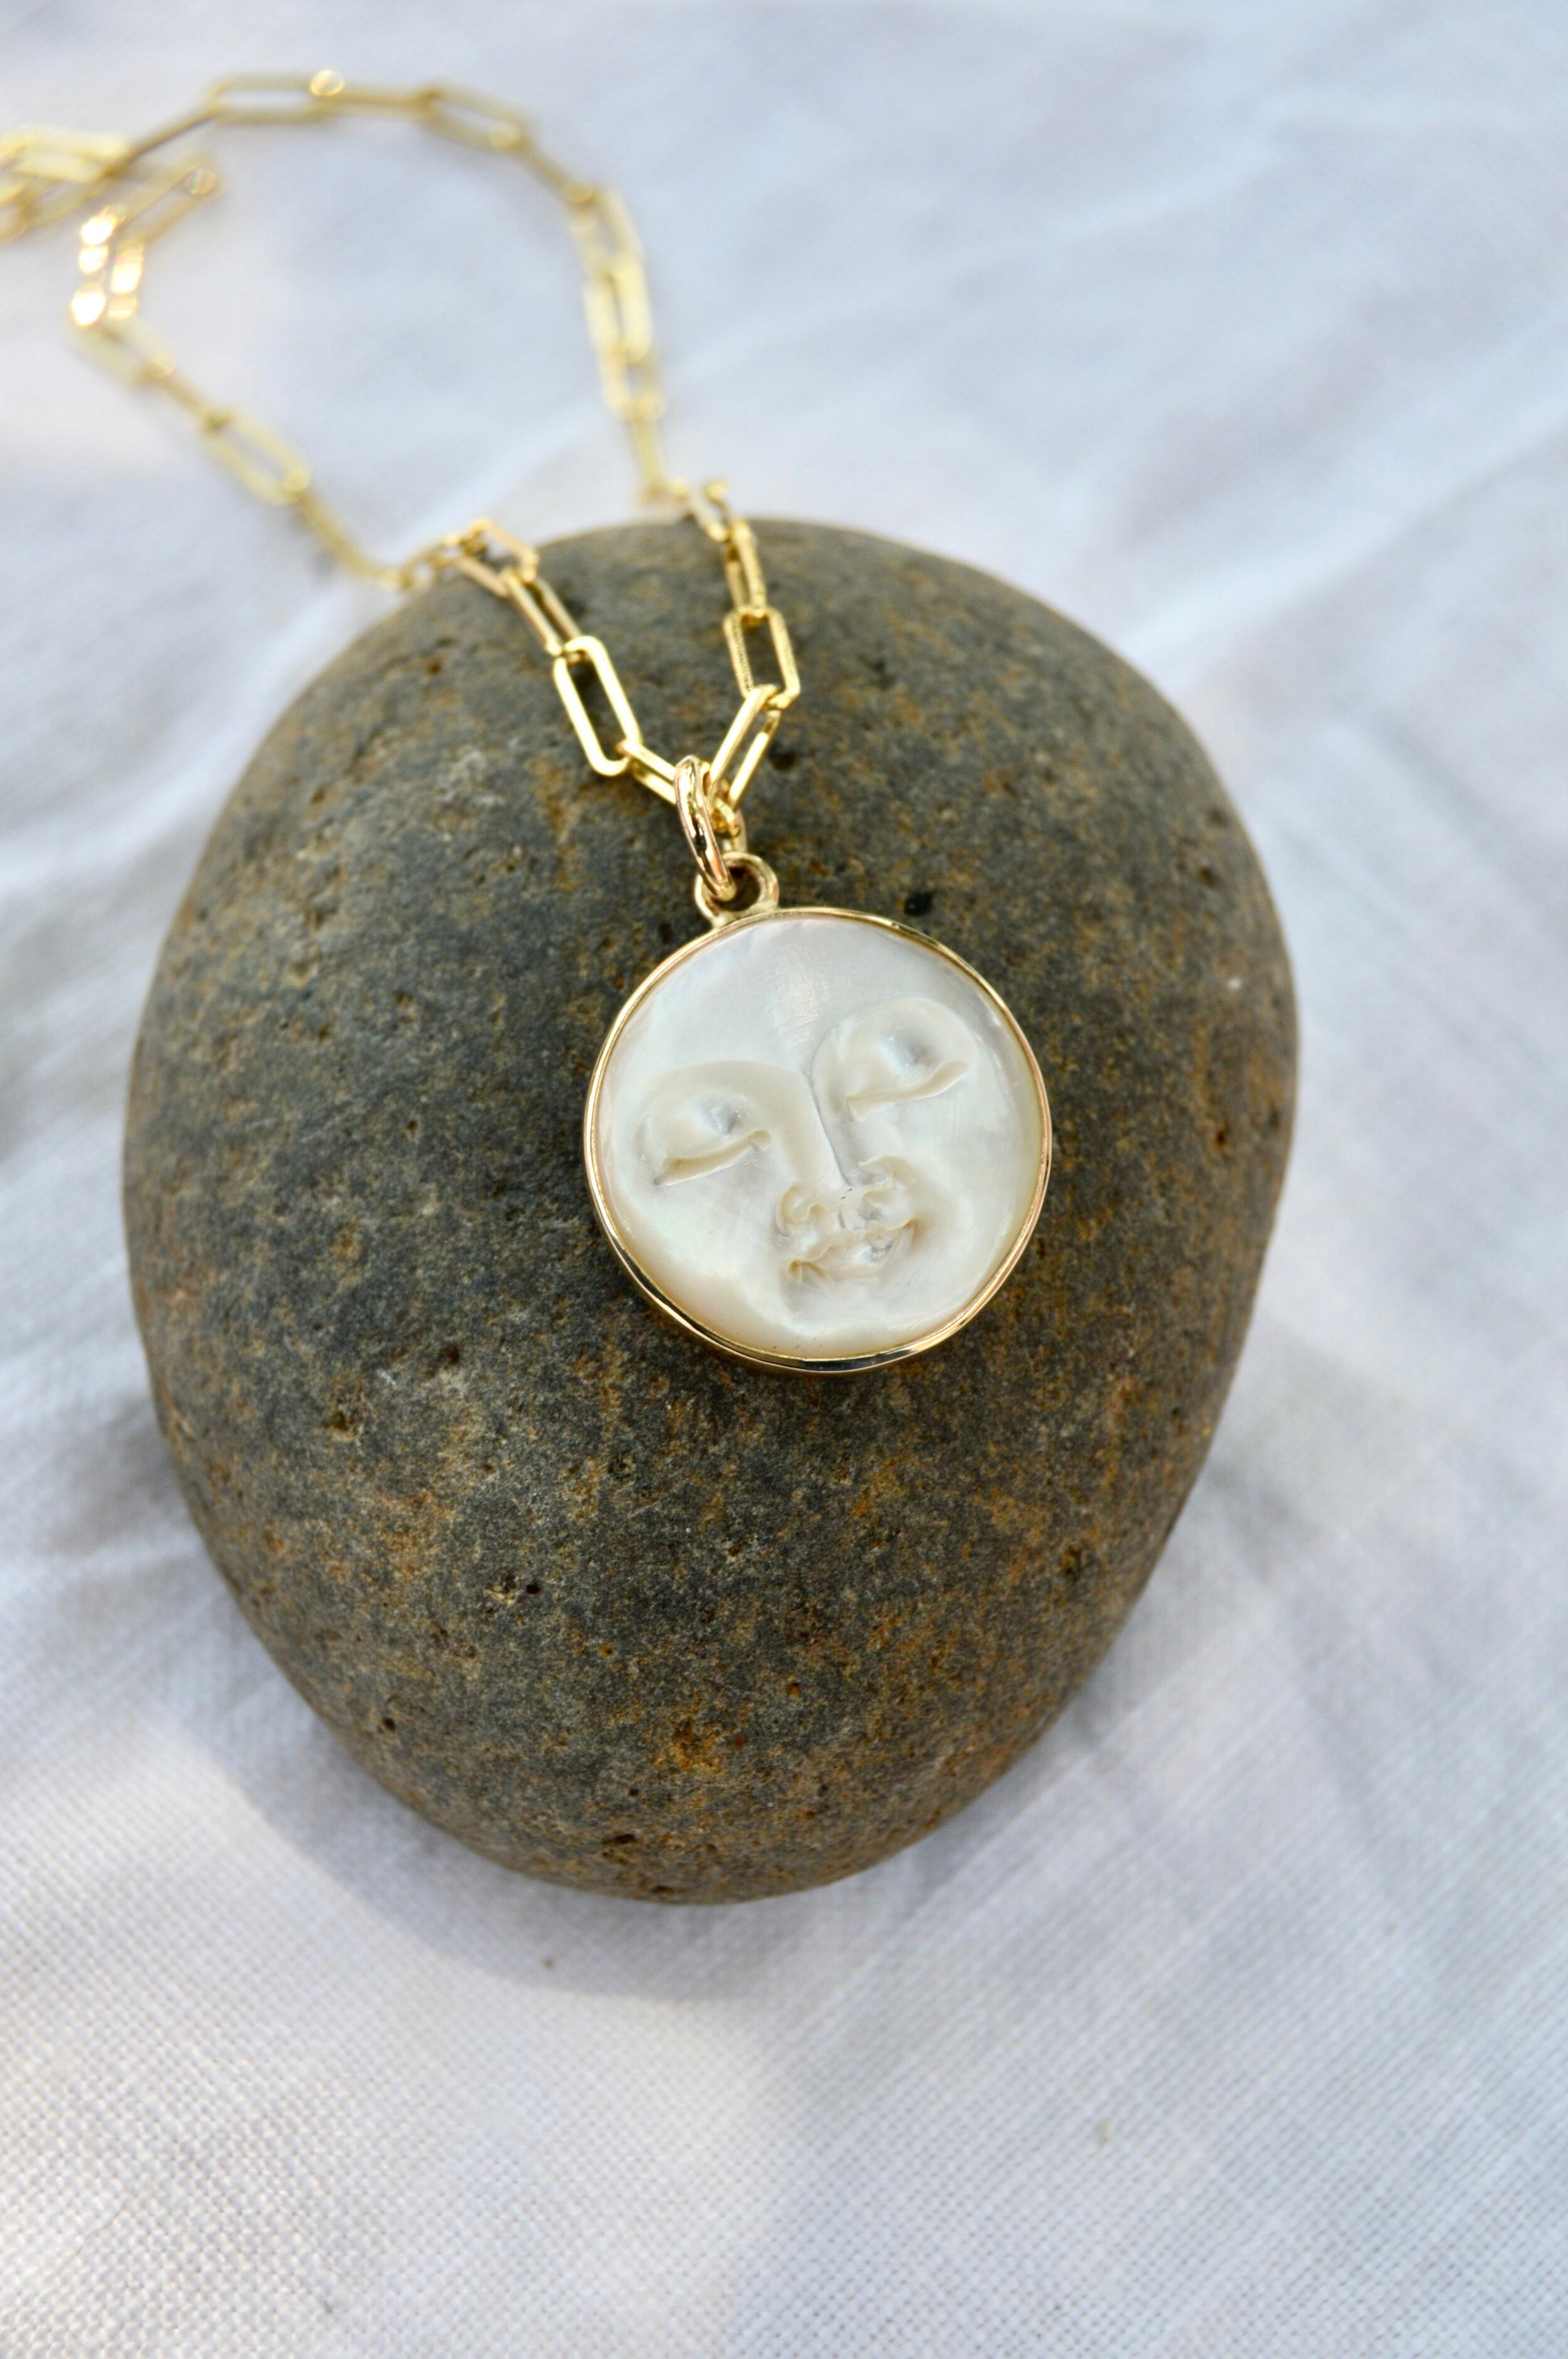 Made by hand in Northern New Mexico using recycled metals and responsibly sourced stones, this timeless, heirloom piece is sure to make a statement.  This ring features a carved Mother of Pearl moon set in a 14k yellow Gold bezel hung on a Sterling Silver chain. Lunarian necklace by Halycon Jewelry.